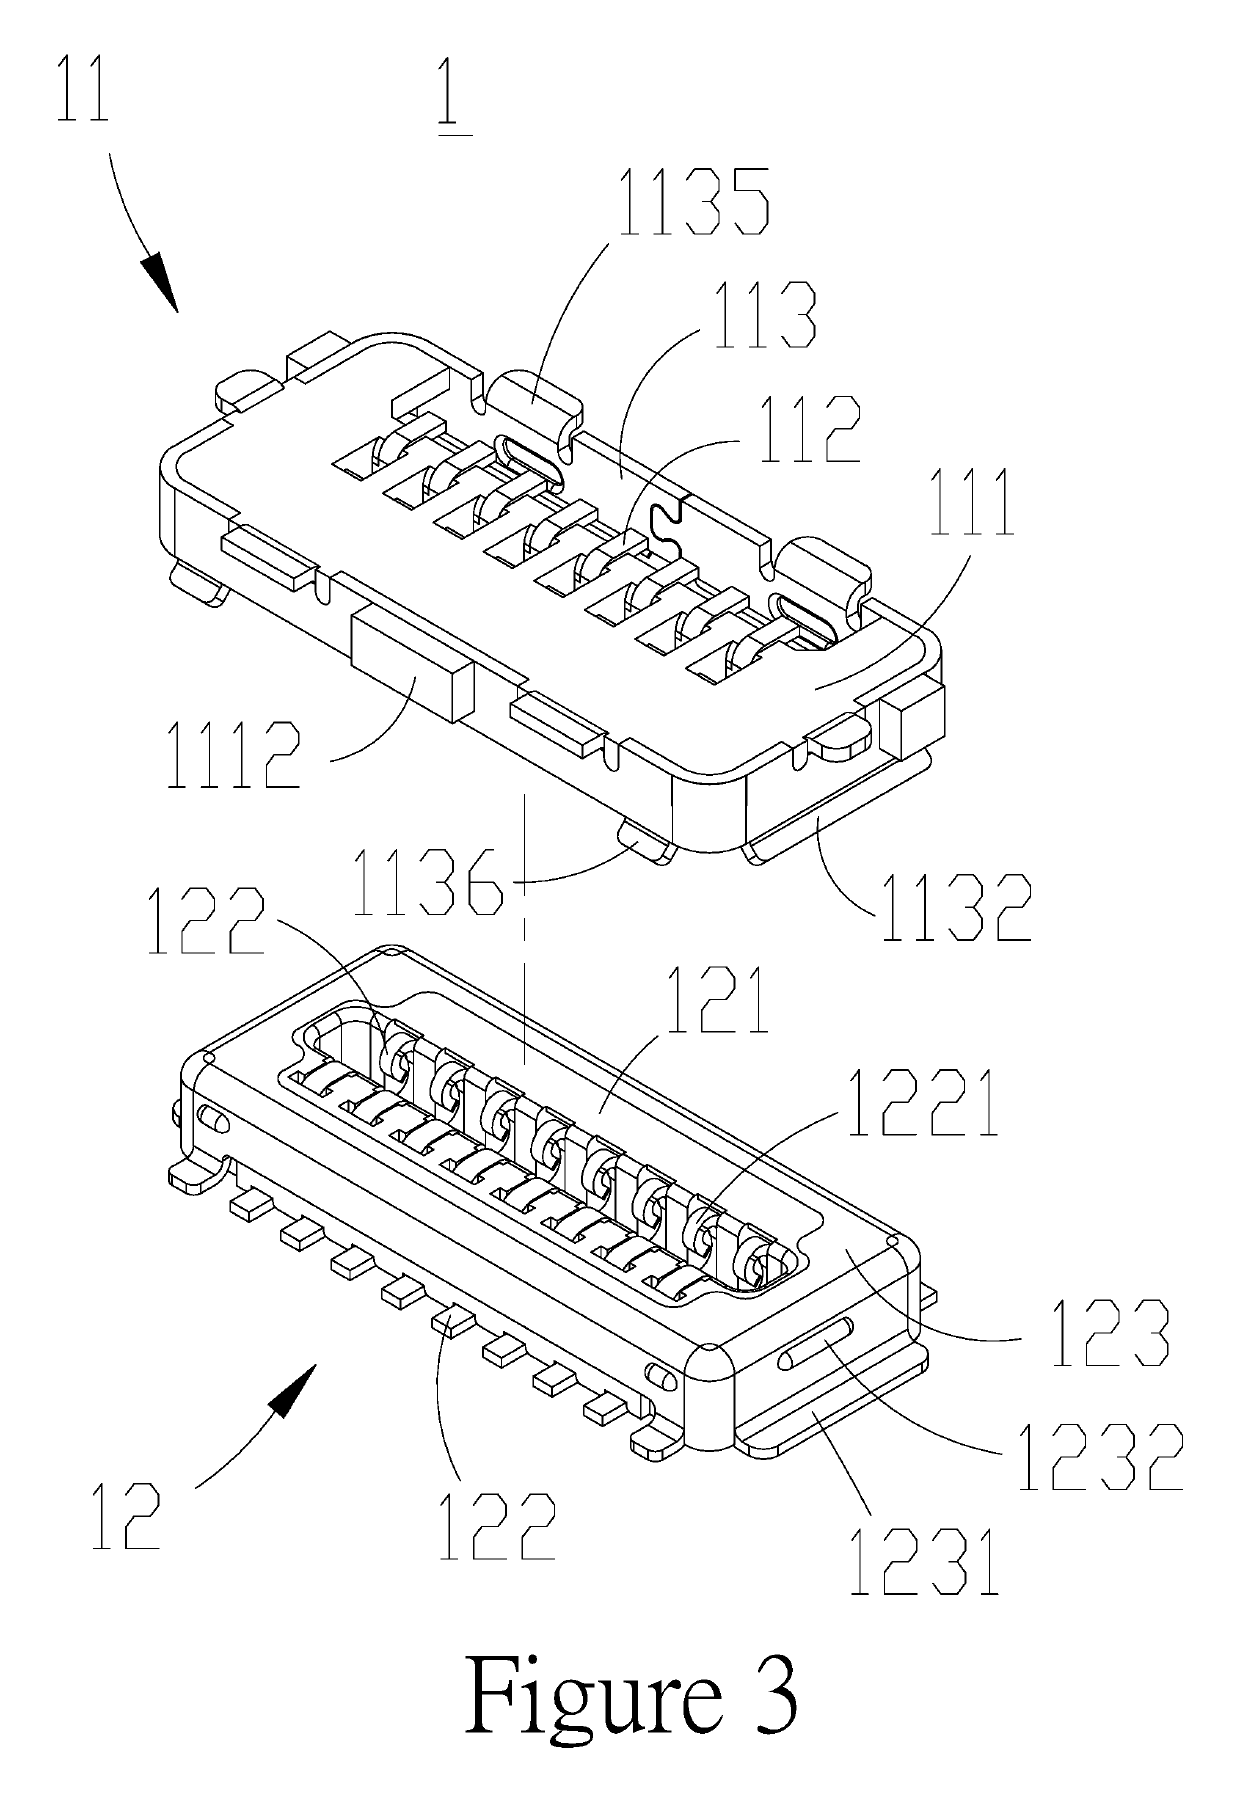 Board to board connector assembly